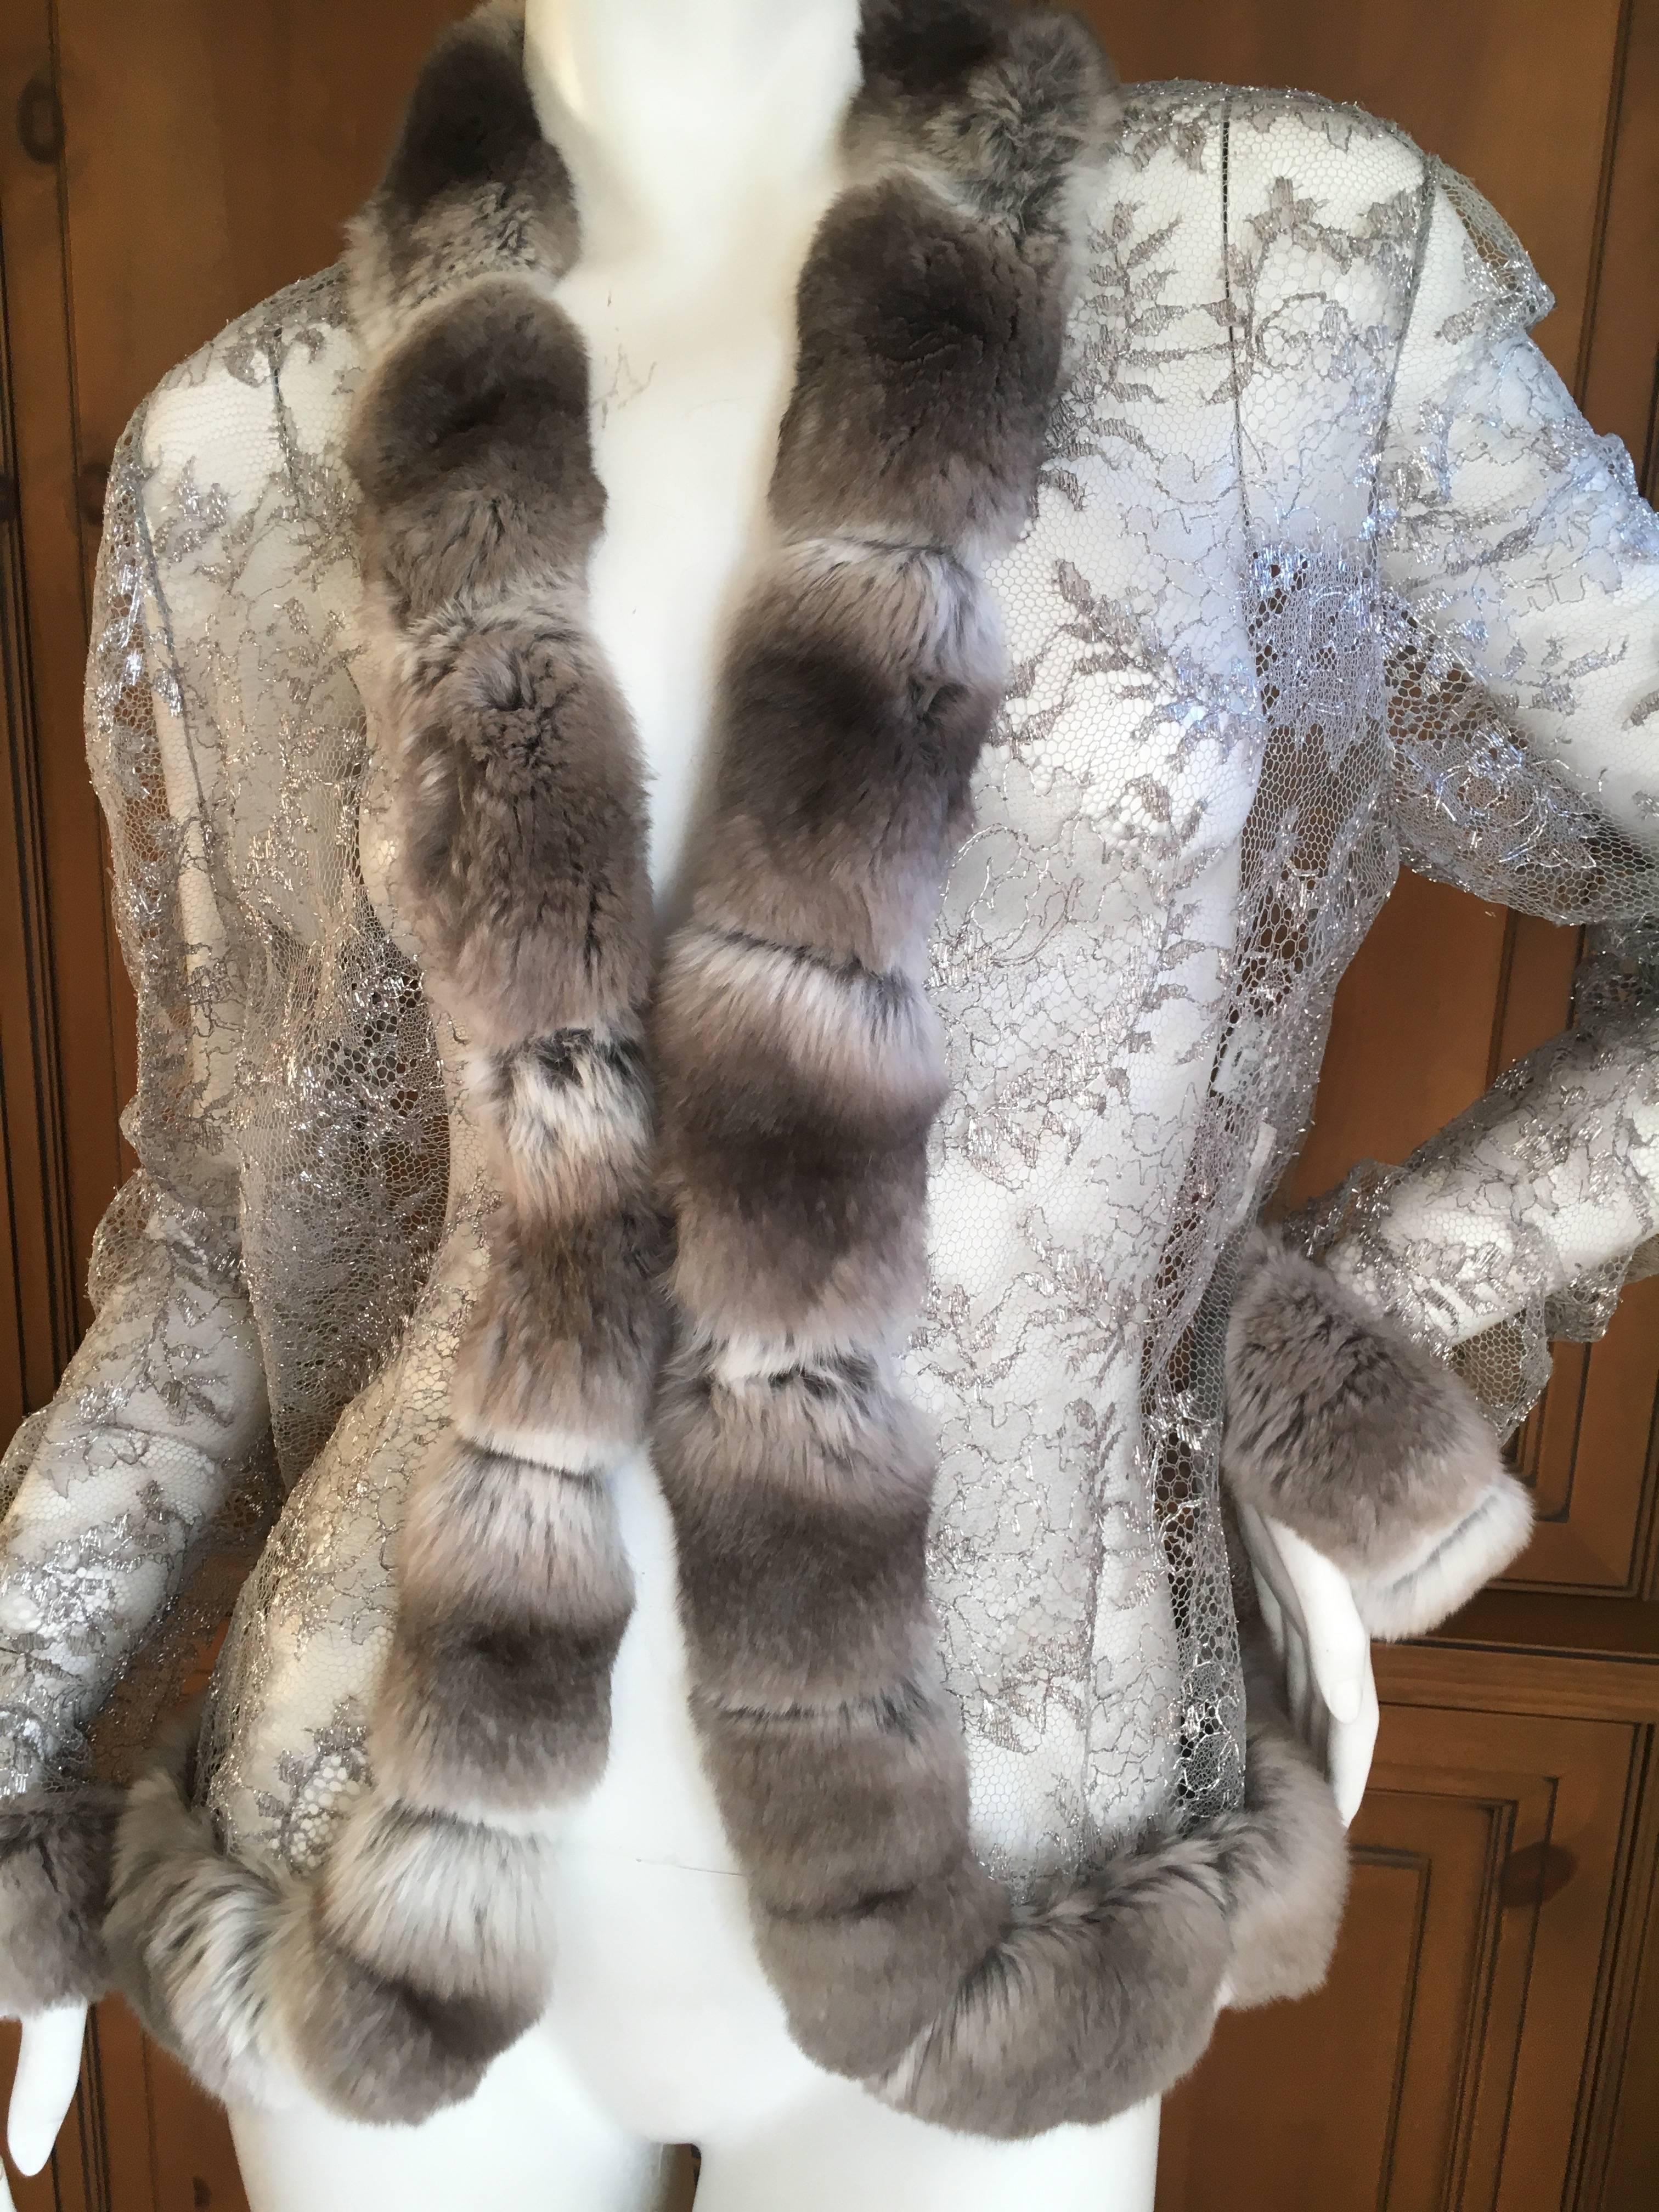 Bill Blass 1980's Sheer Silver Lace Jacket with Genuine Chinchilla Trim
Size 12
Bust 44"
Length 24"